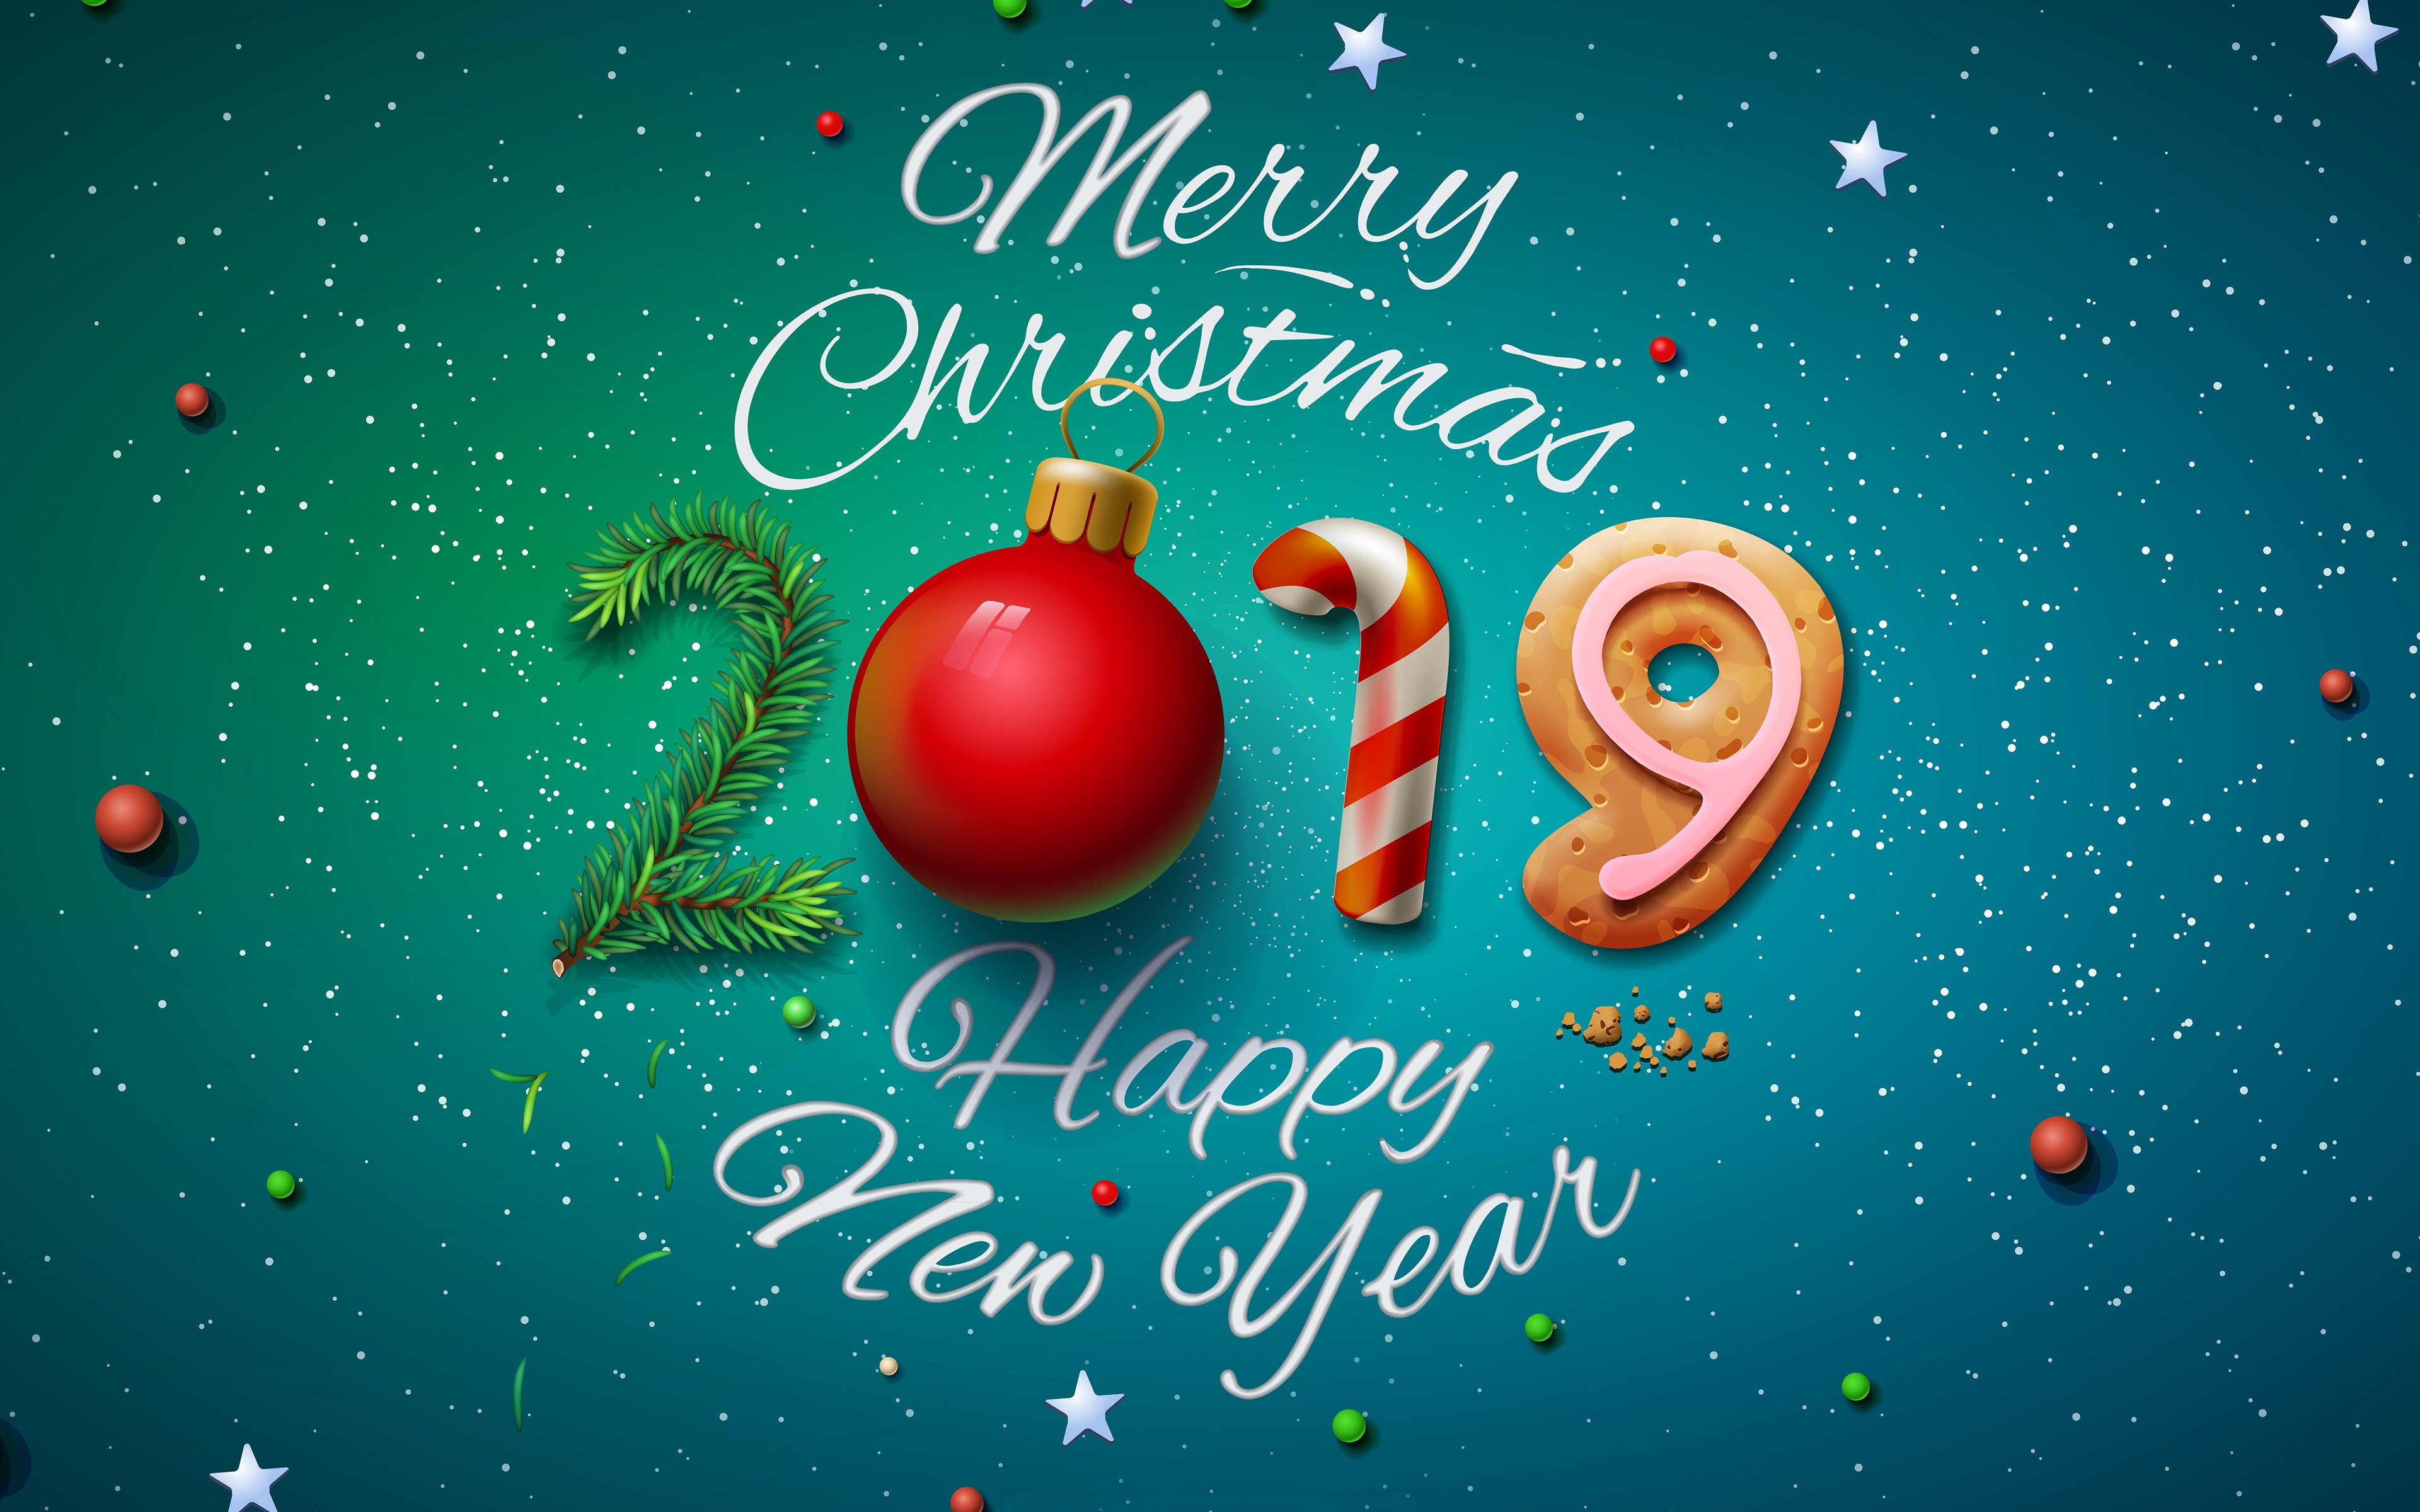 Merry Christmas 2019 Happy New Year 4k Wallpaper Hd - Christmas Images 2019  Hd - 3840x2400 Wallpaper 